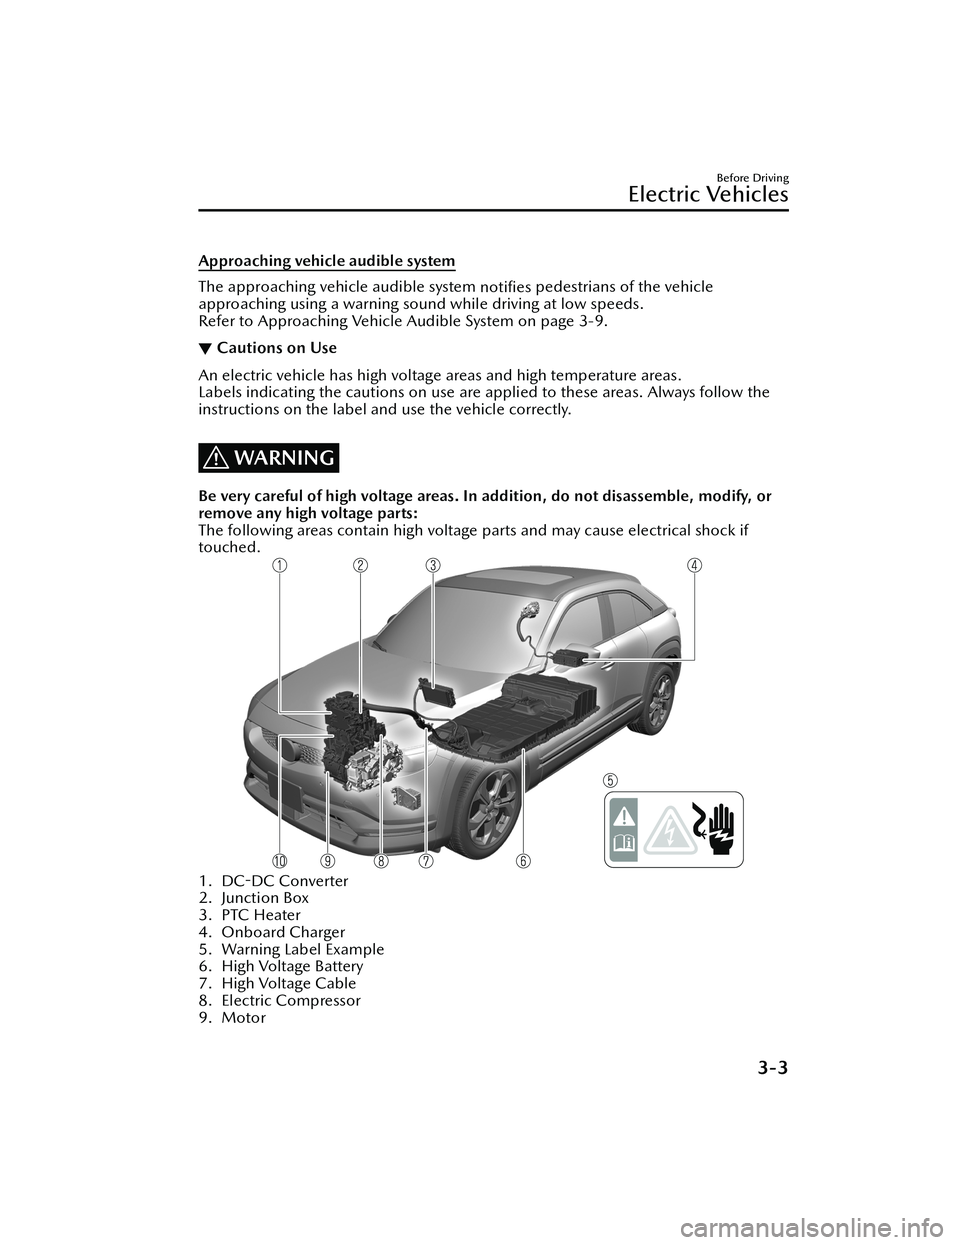 MAZDA MODEL MX-30 EV 2022  Owners Manual Approaching vehicle audible system
The approaching vehicle audible system notiﬁes pedestrians of the vehicle
approaching using a warning sound while driving at low speeds.
Refer to Approaching Vehic